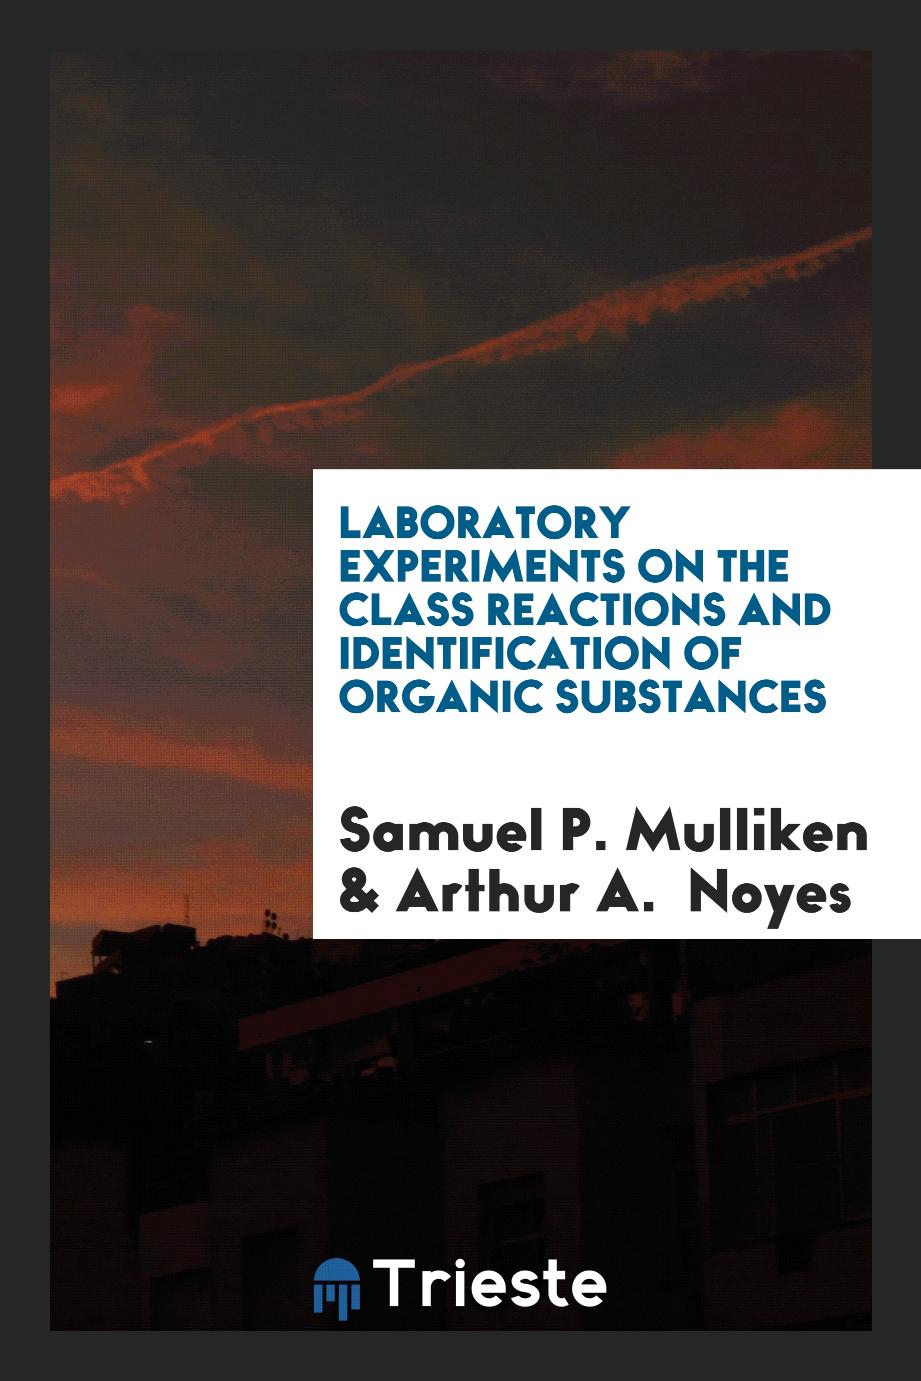 Laboratory experiments on the class reactions and identification of organic substances